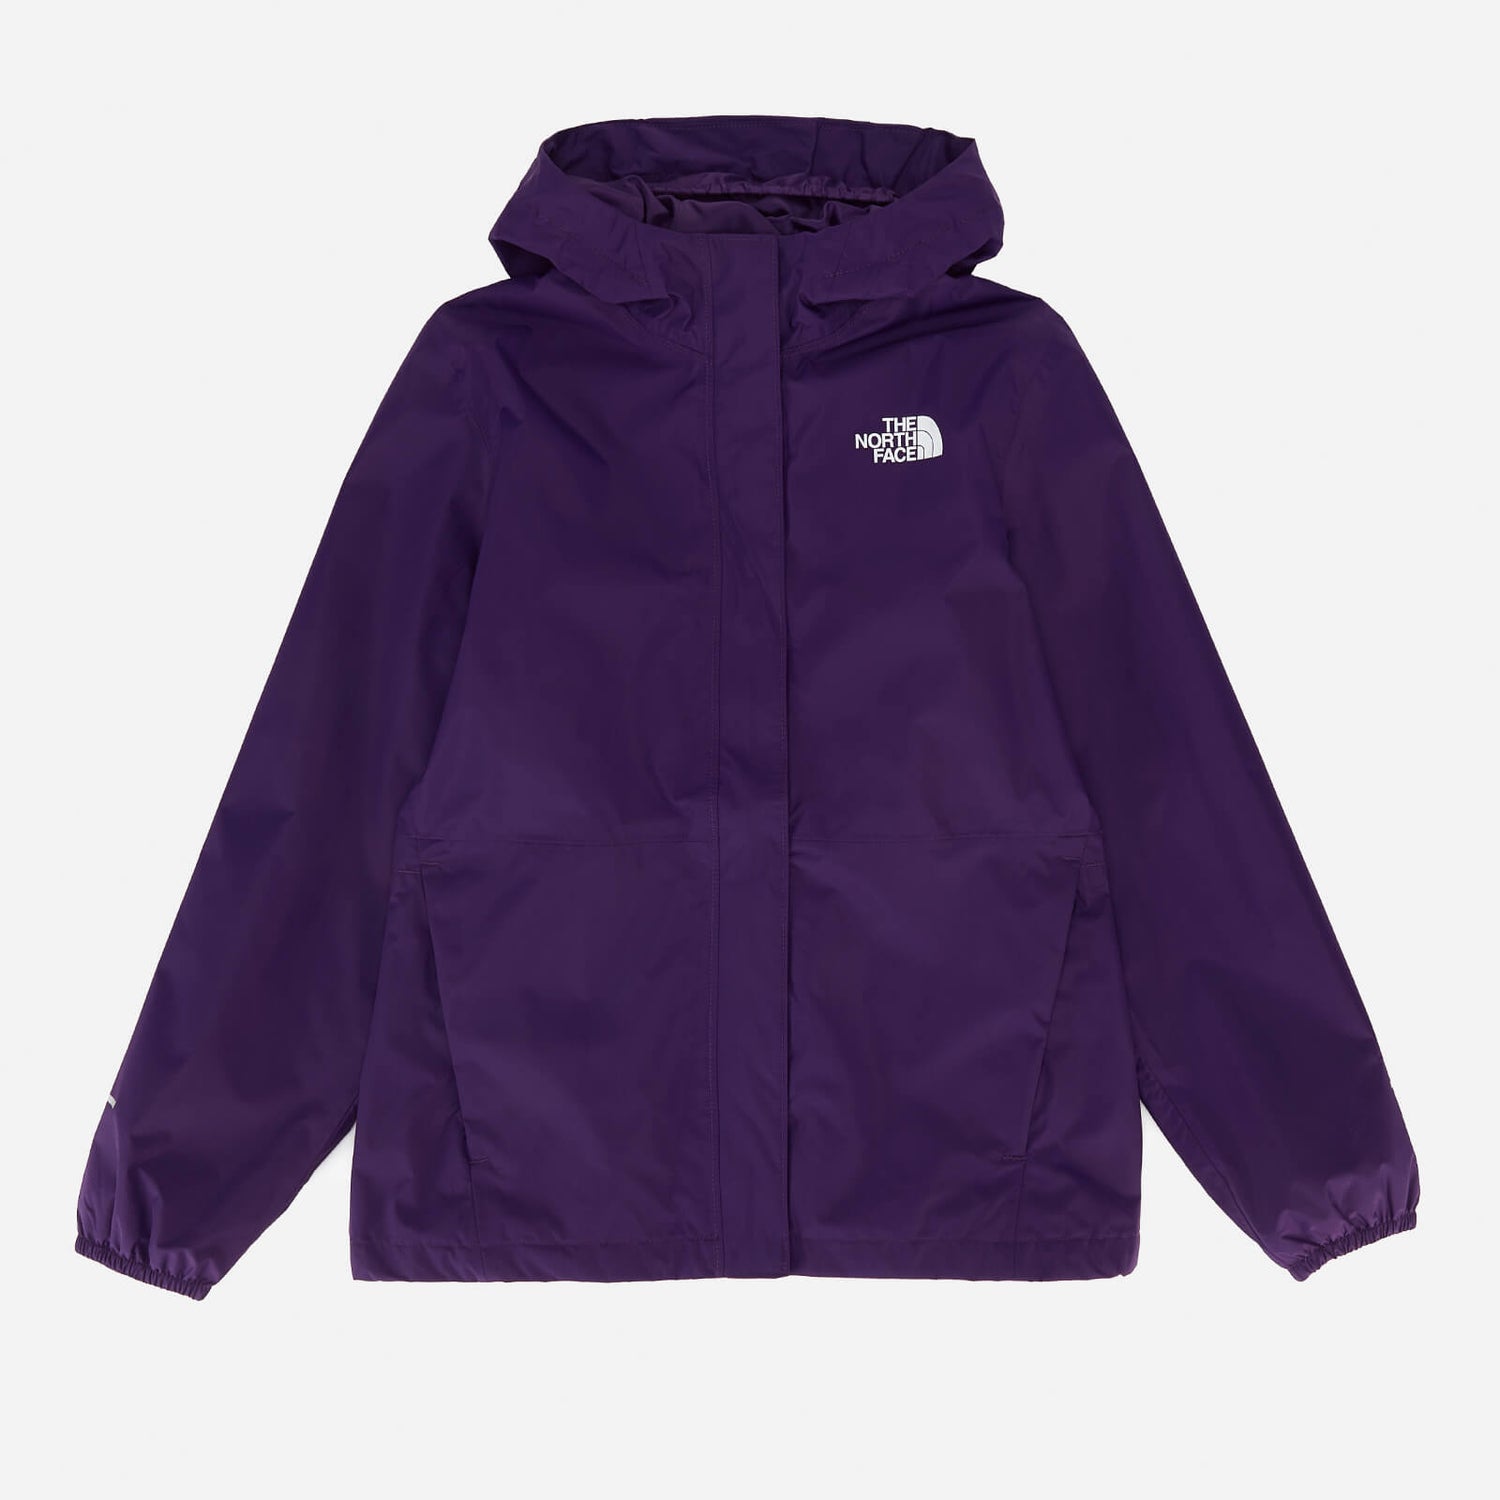 The North Face Girls' Resolve Reflective Jacket - Purple - 5-6 Years